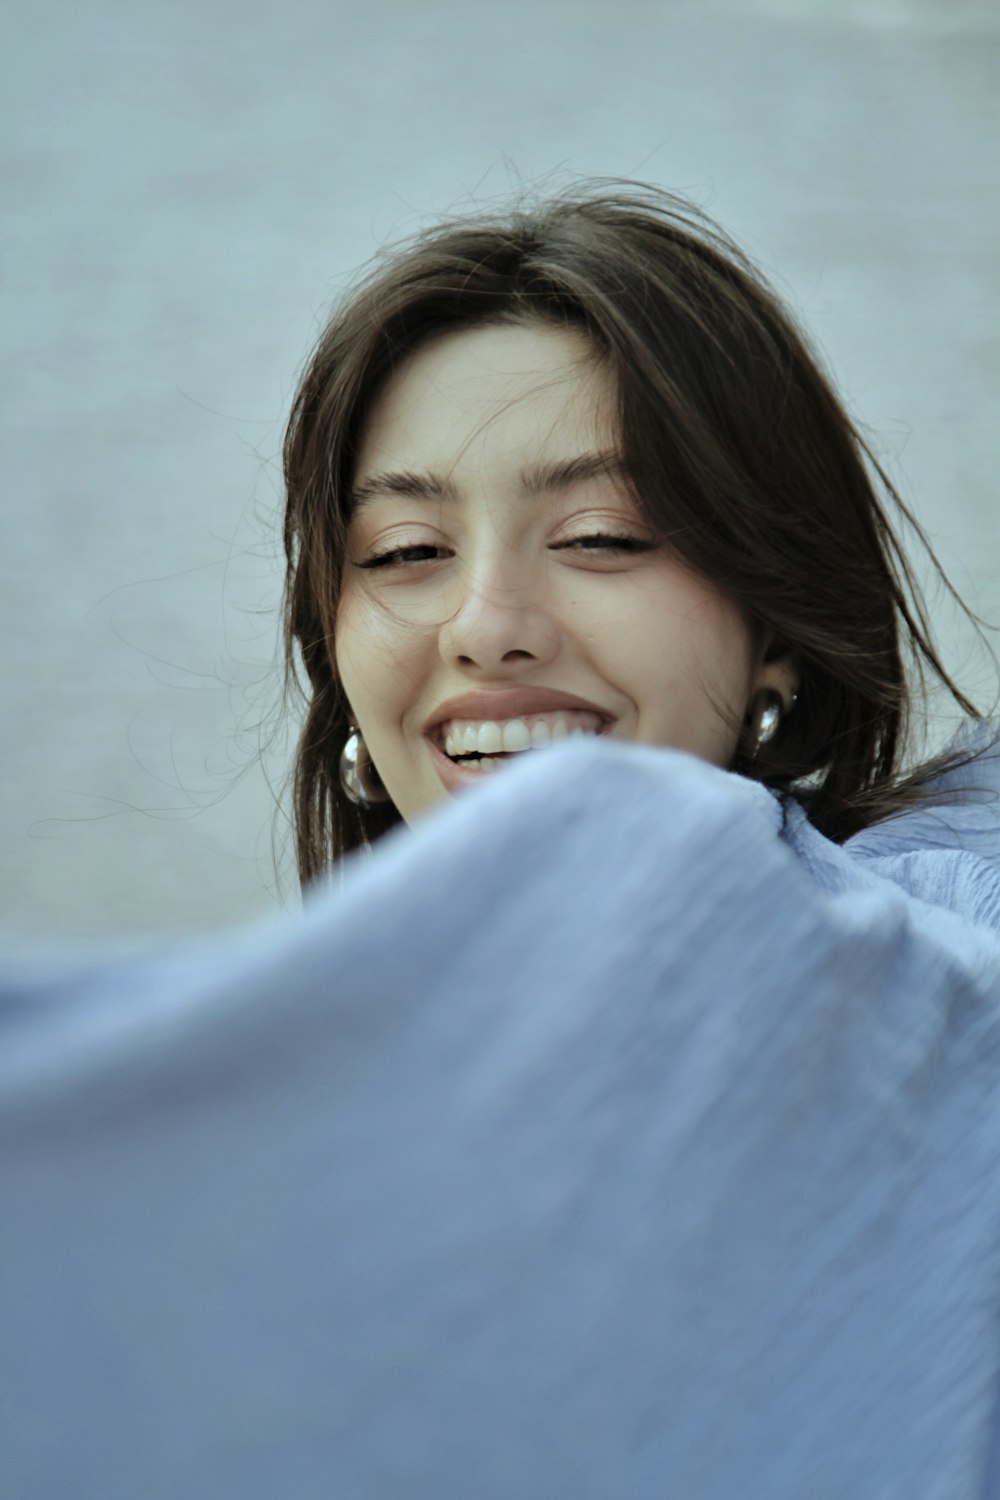 a woman with her eyes closed smiling